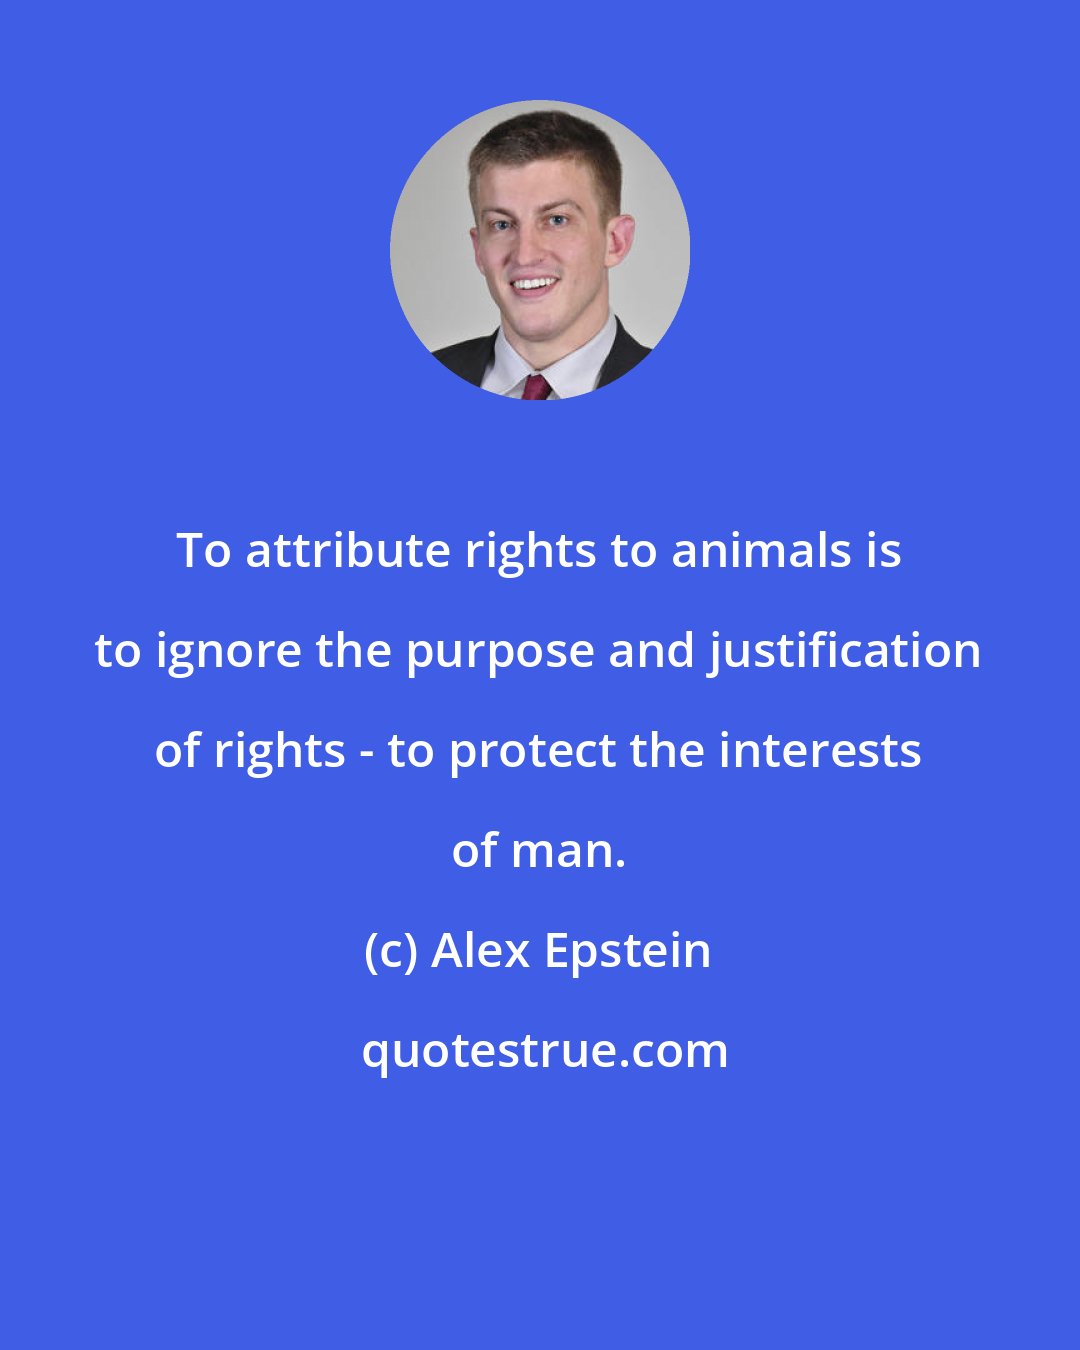 Alex Epstein: To attribute rights to animals is to ignore the purpose and justification of rights - to protect the interests of man.